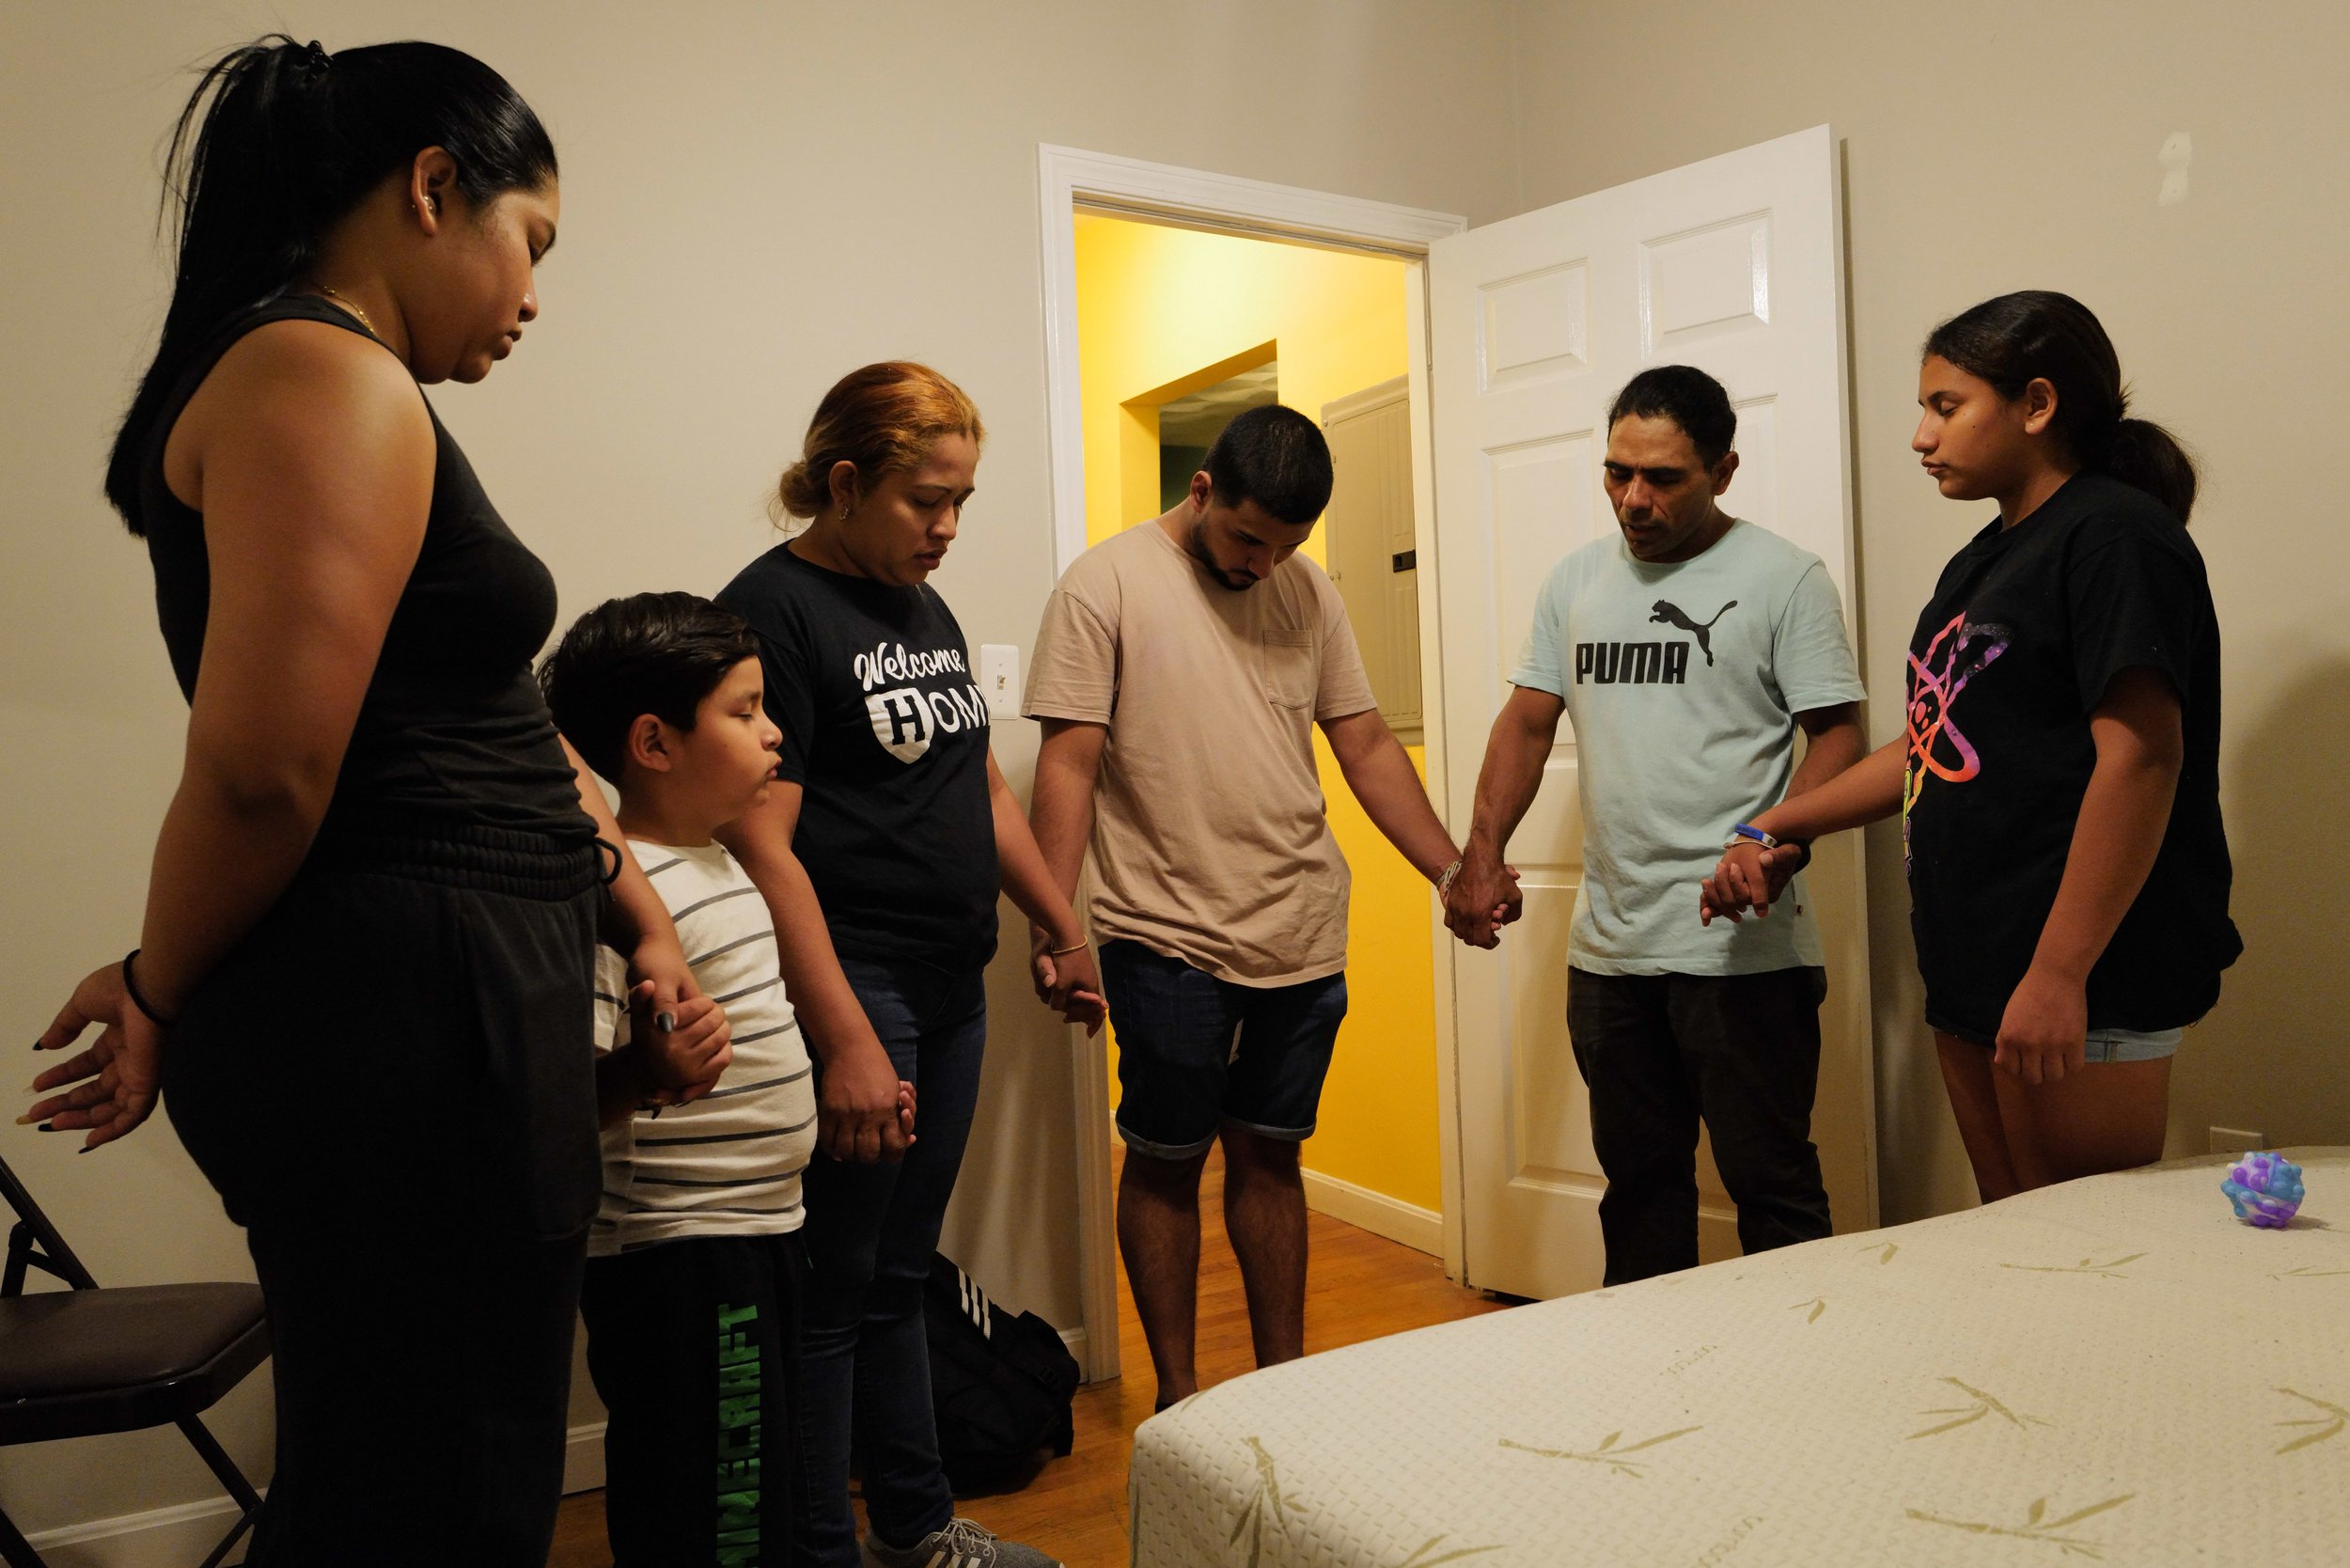  Teresa’s children Kairy Lisbeth, 17 and Raul Alexis, 6, Teresa, Manuel’s son Melquencedec Anthony, 21, Manuel and Manuel’s daughter, Fernanda Aimee, 12, hold hands in prayer after moving into their new more spacious home in Somerville, Mass. in the 